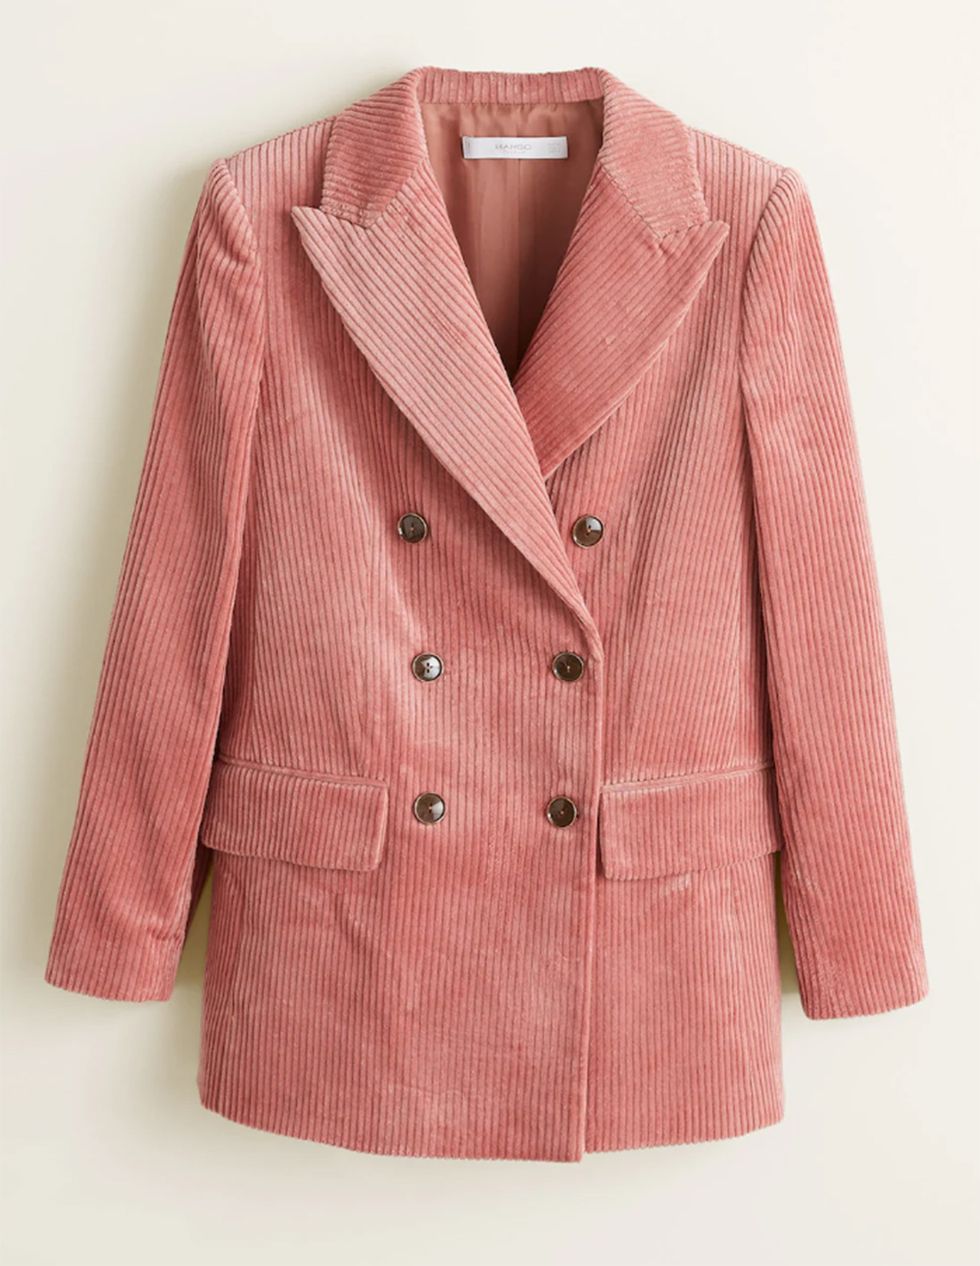 Clothing, Outerwear, Pink, Jacket, Blazer, Sleeve, Button, Coat, Pocket, Top, 